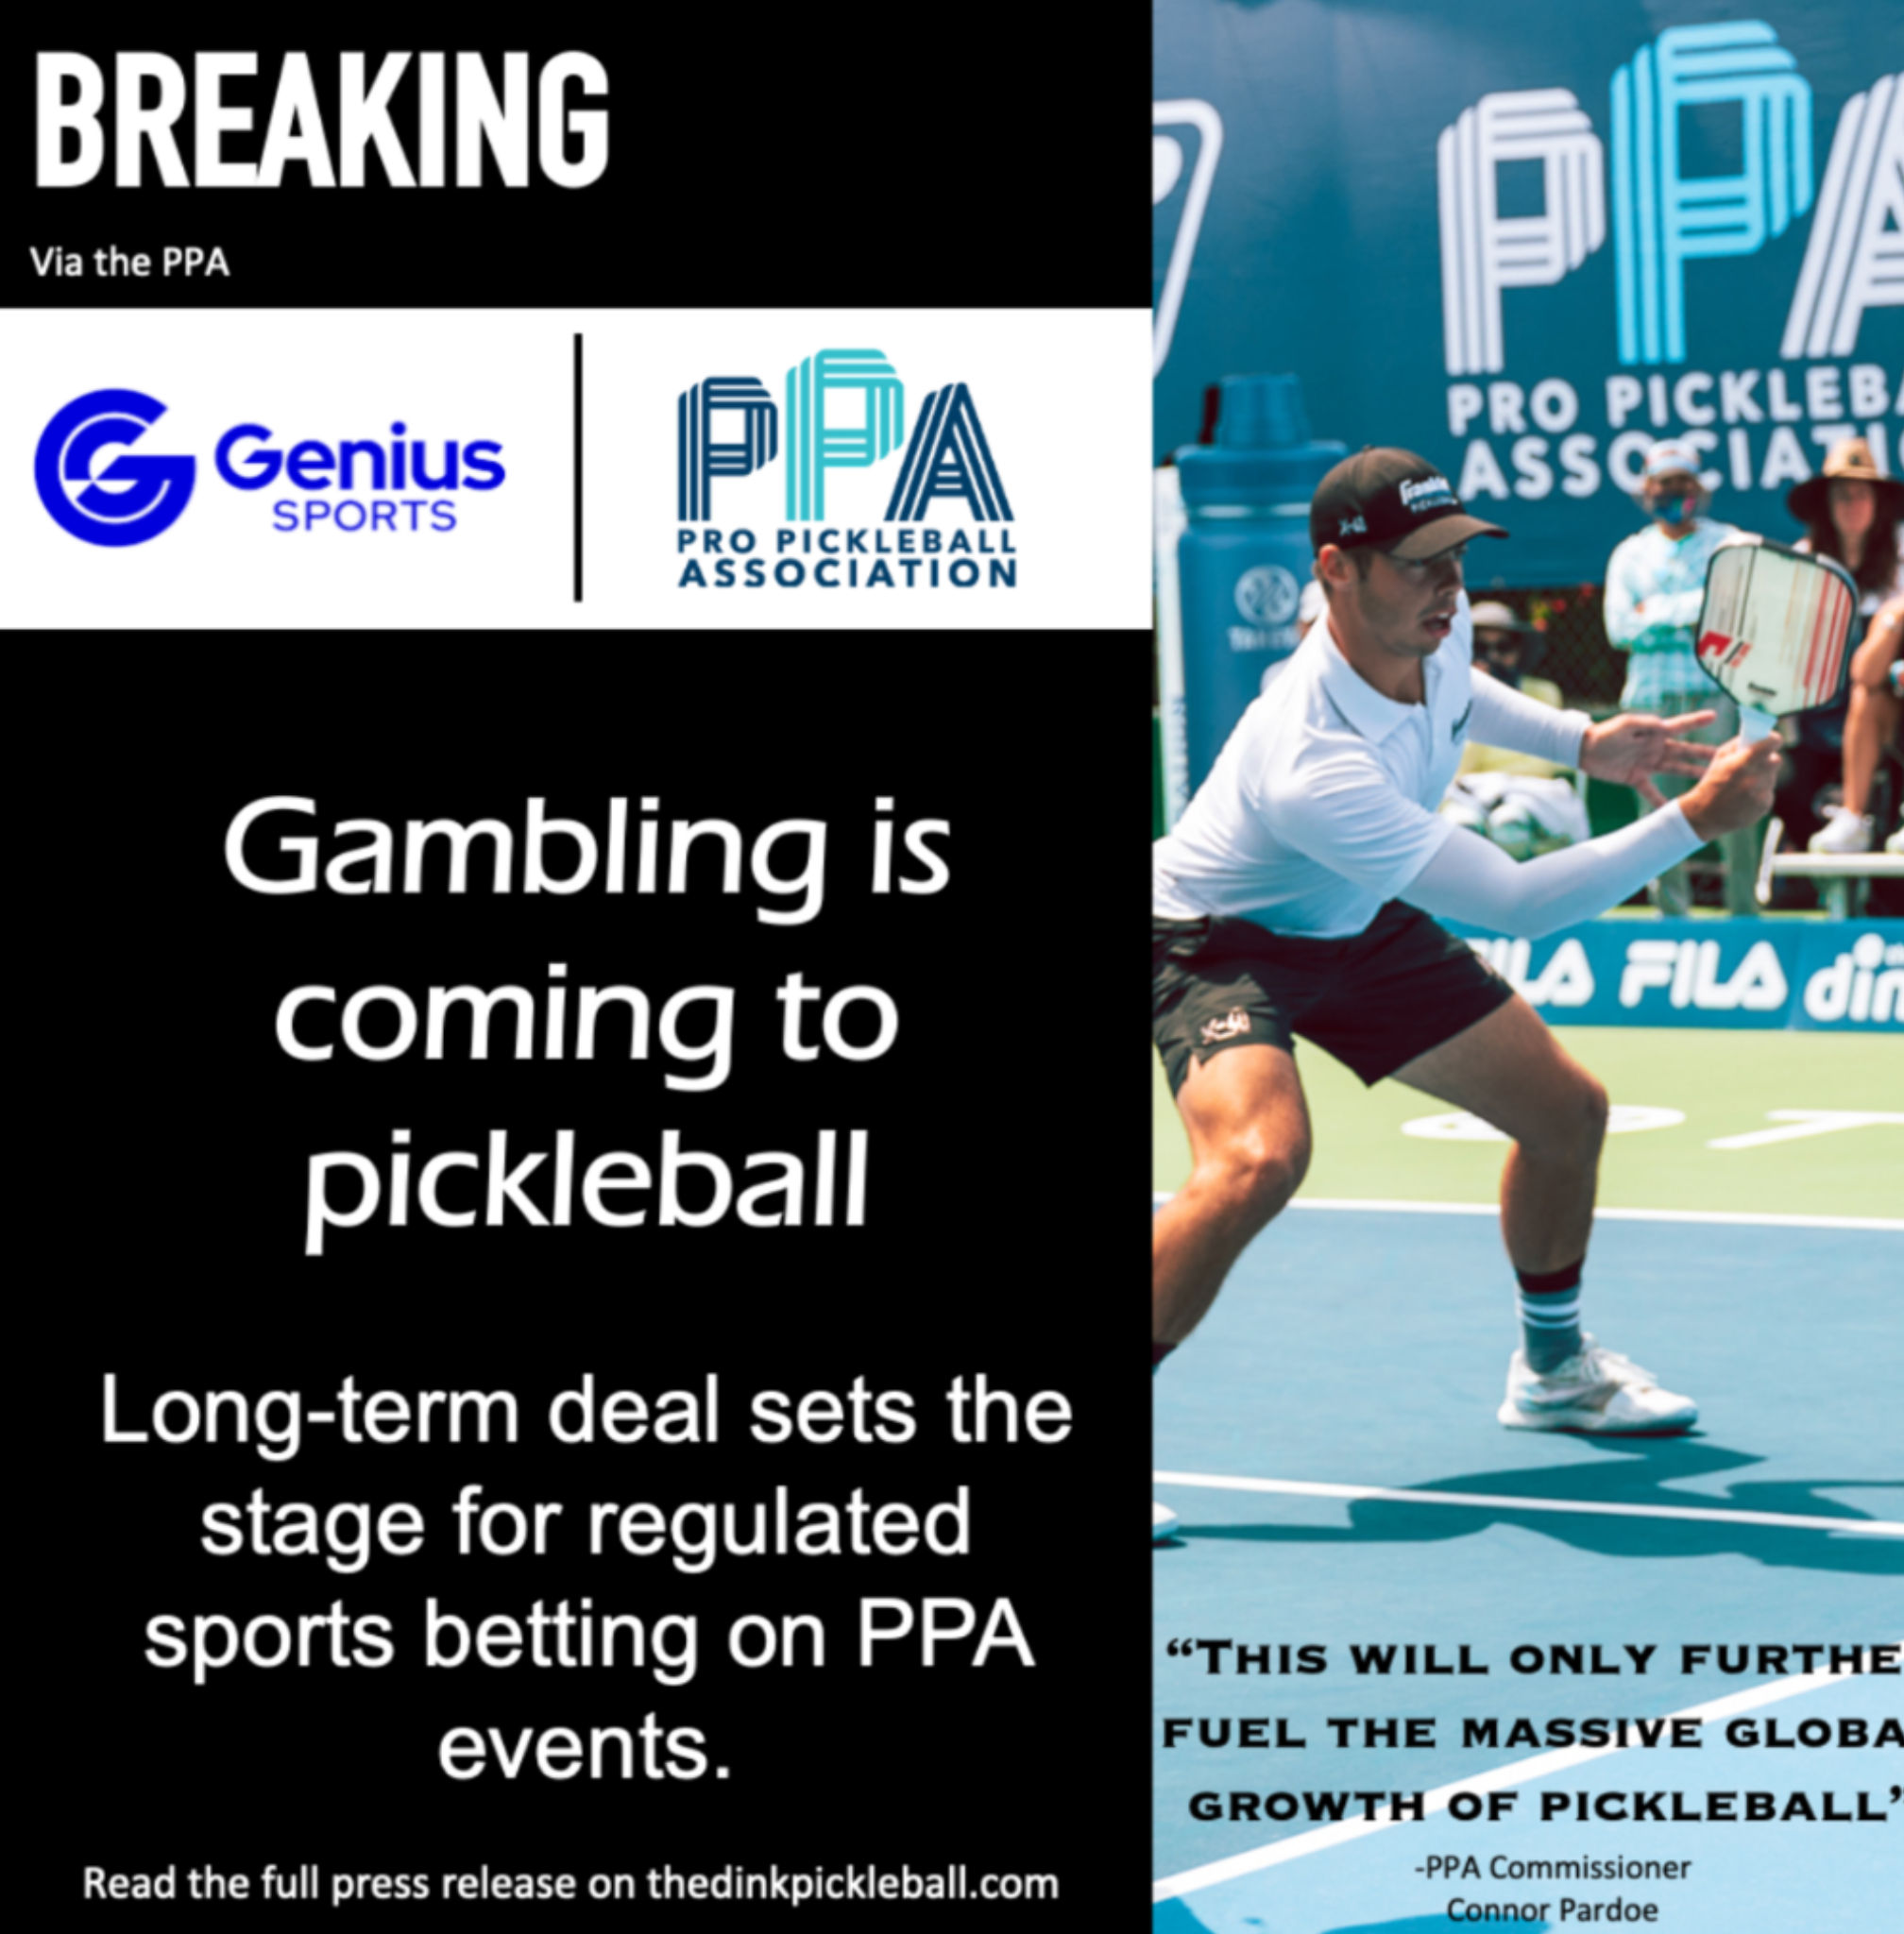 PPA Gambling is Coming to Pickleball